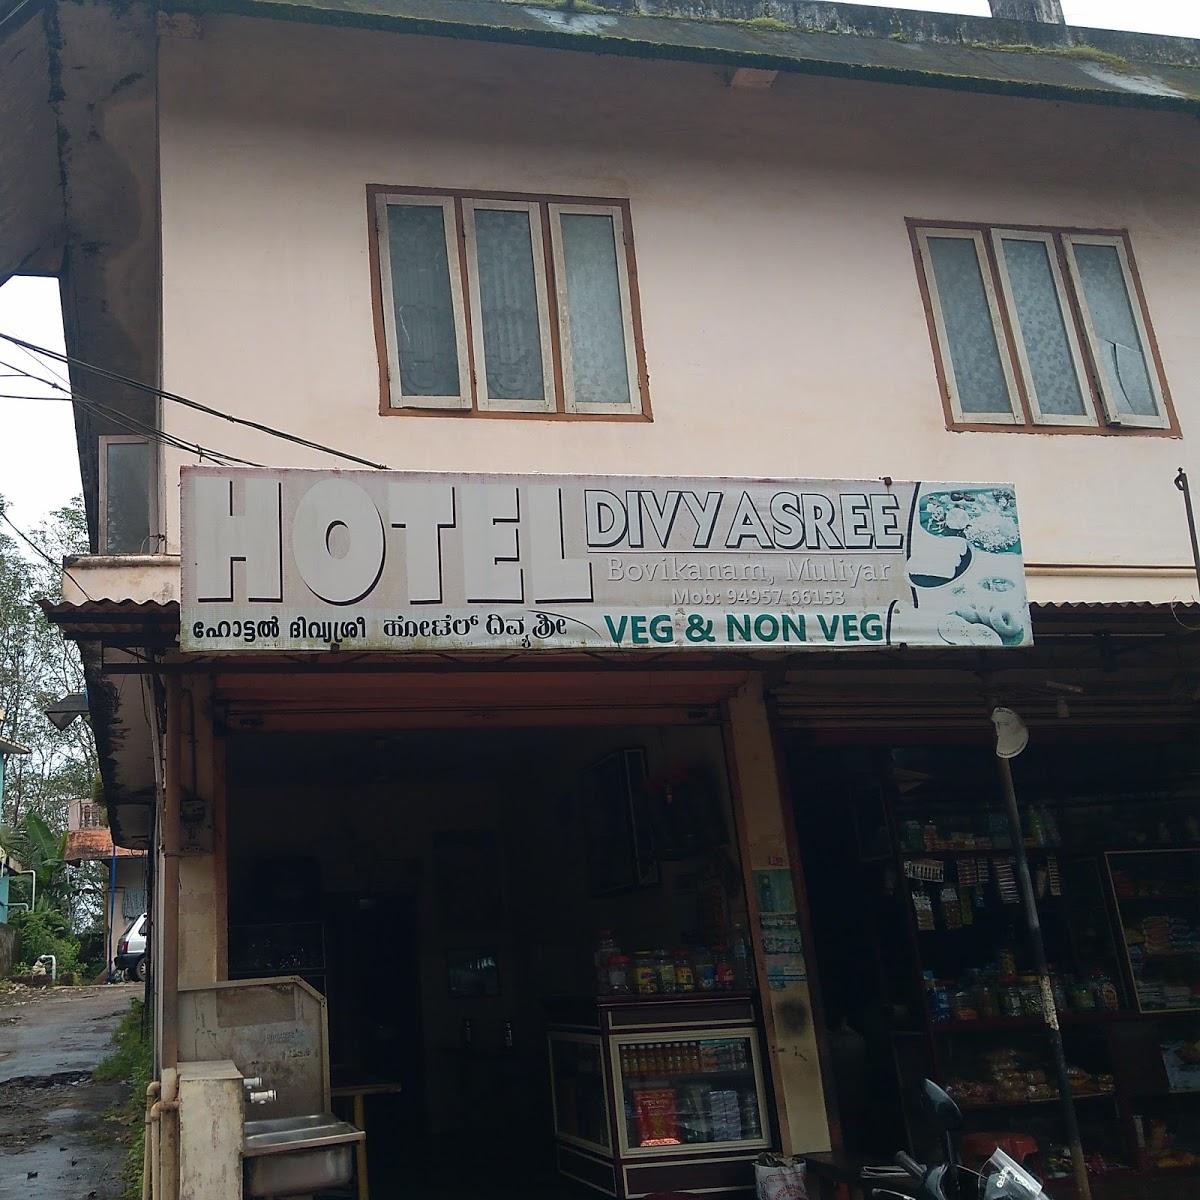 3S Hotel Hotel Puri - Reviews, Photos & Offer